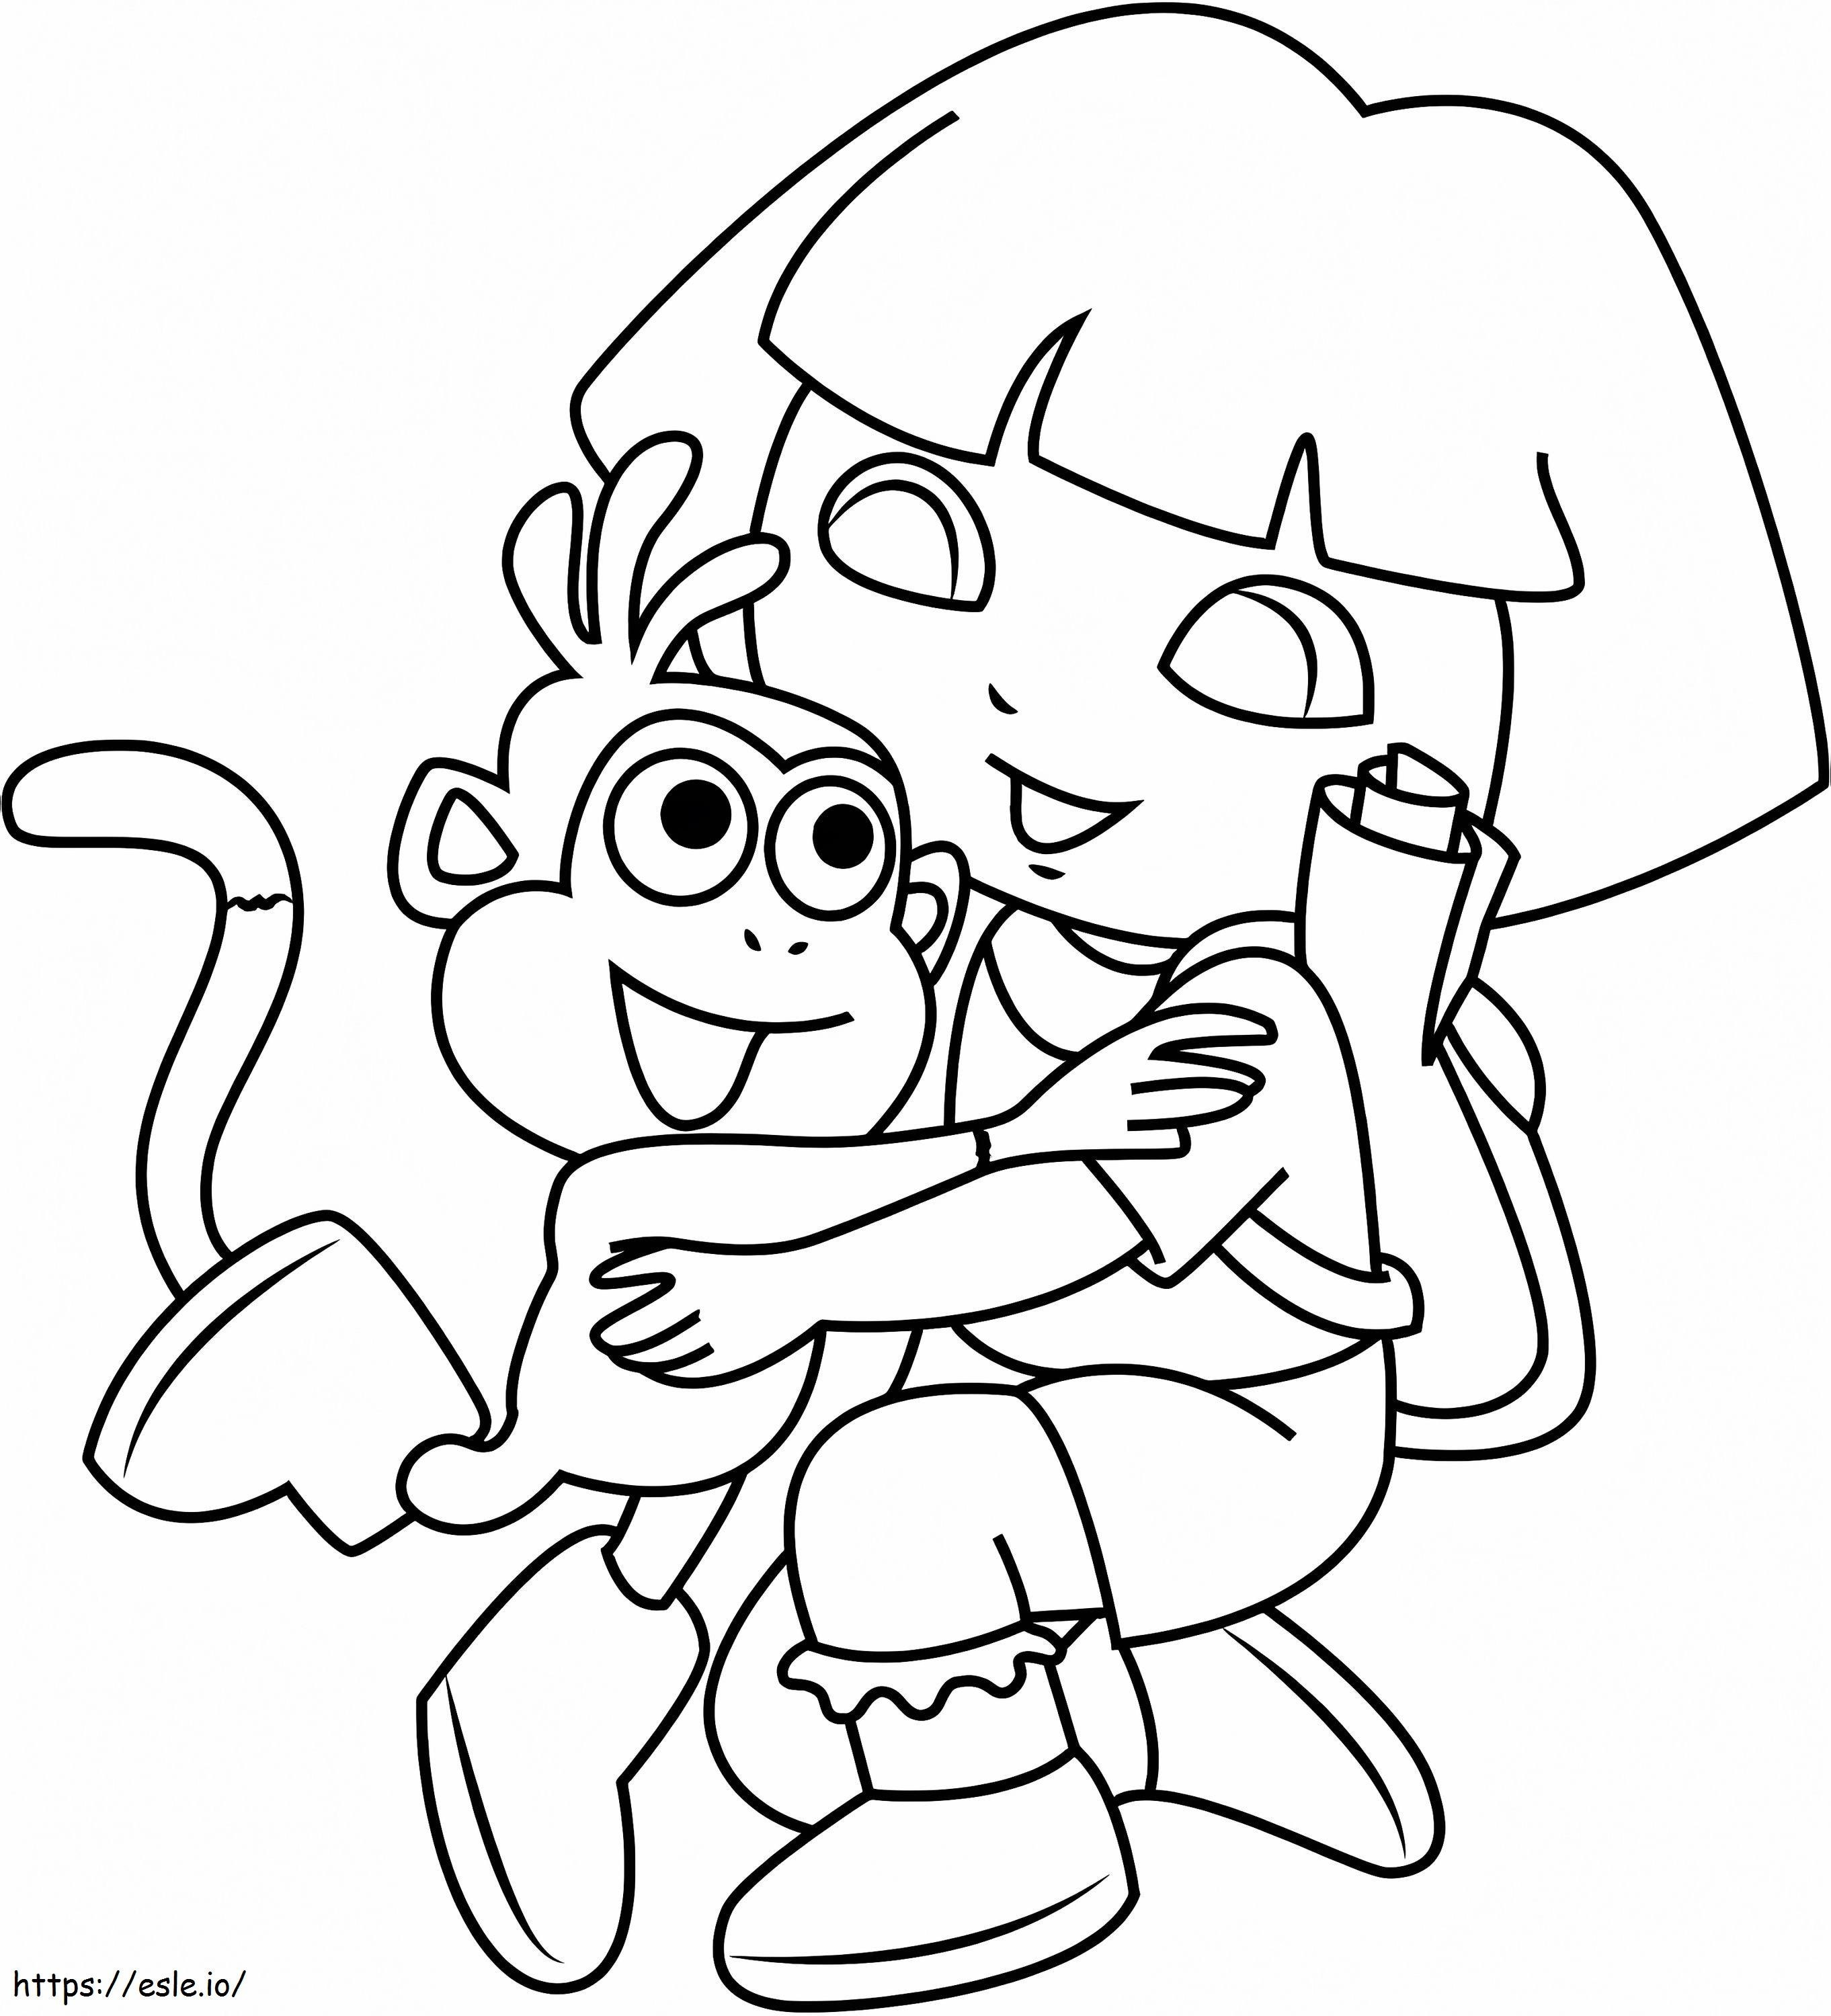 Dora Hugging The Monkey coloring page